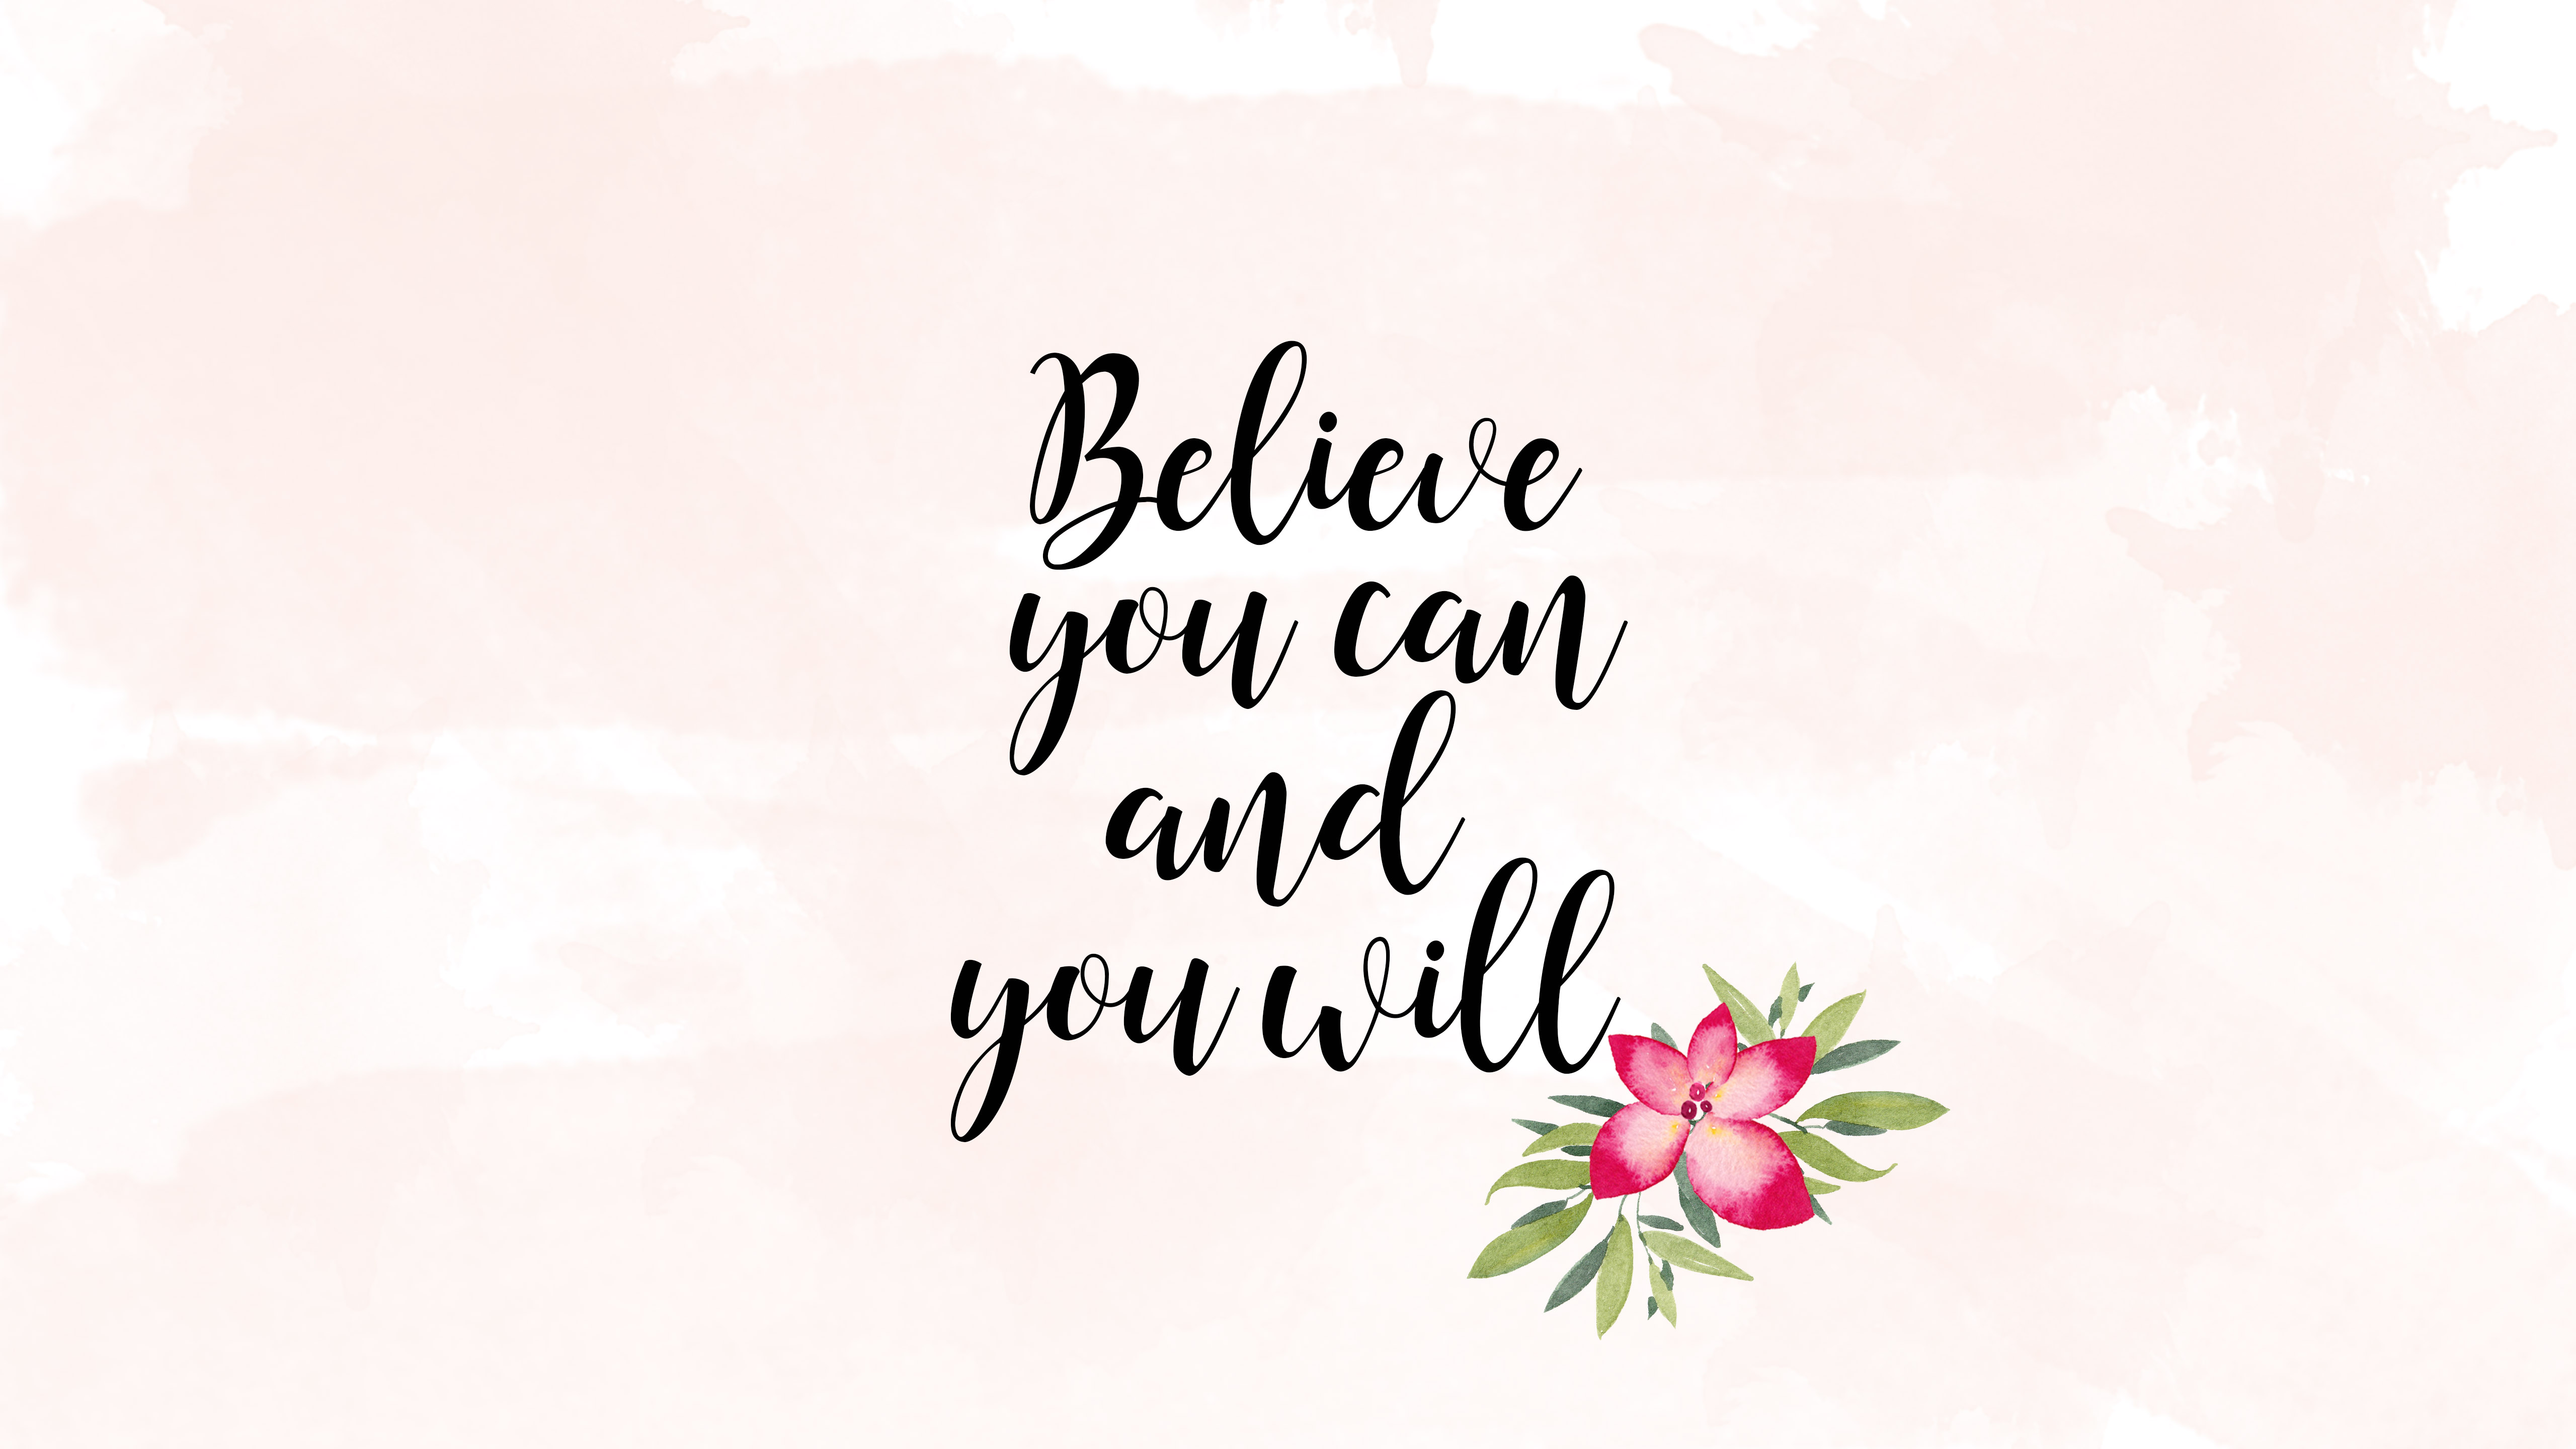 I Can And I Will Wallpapers